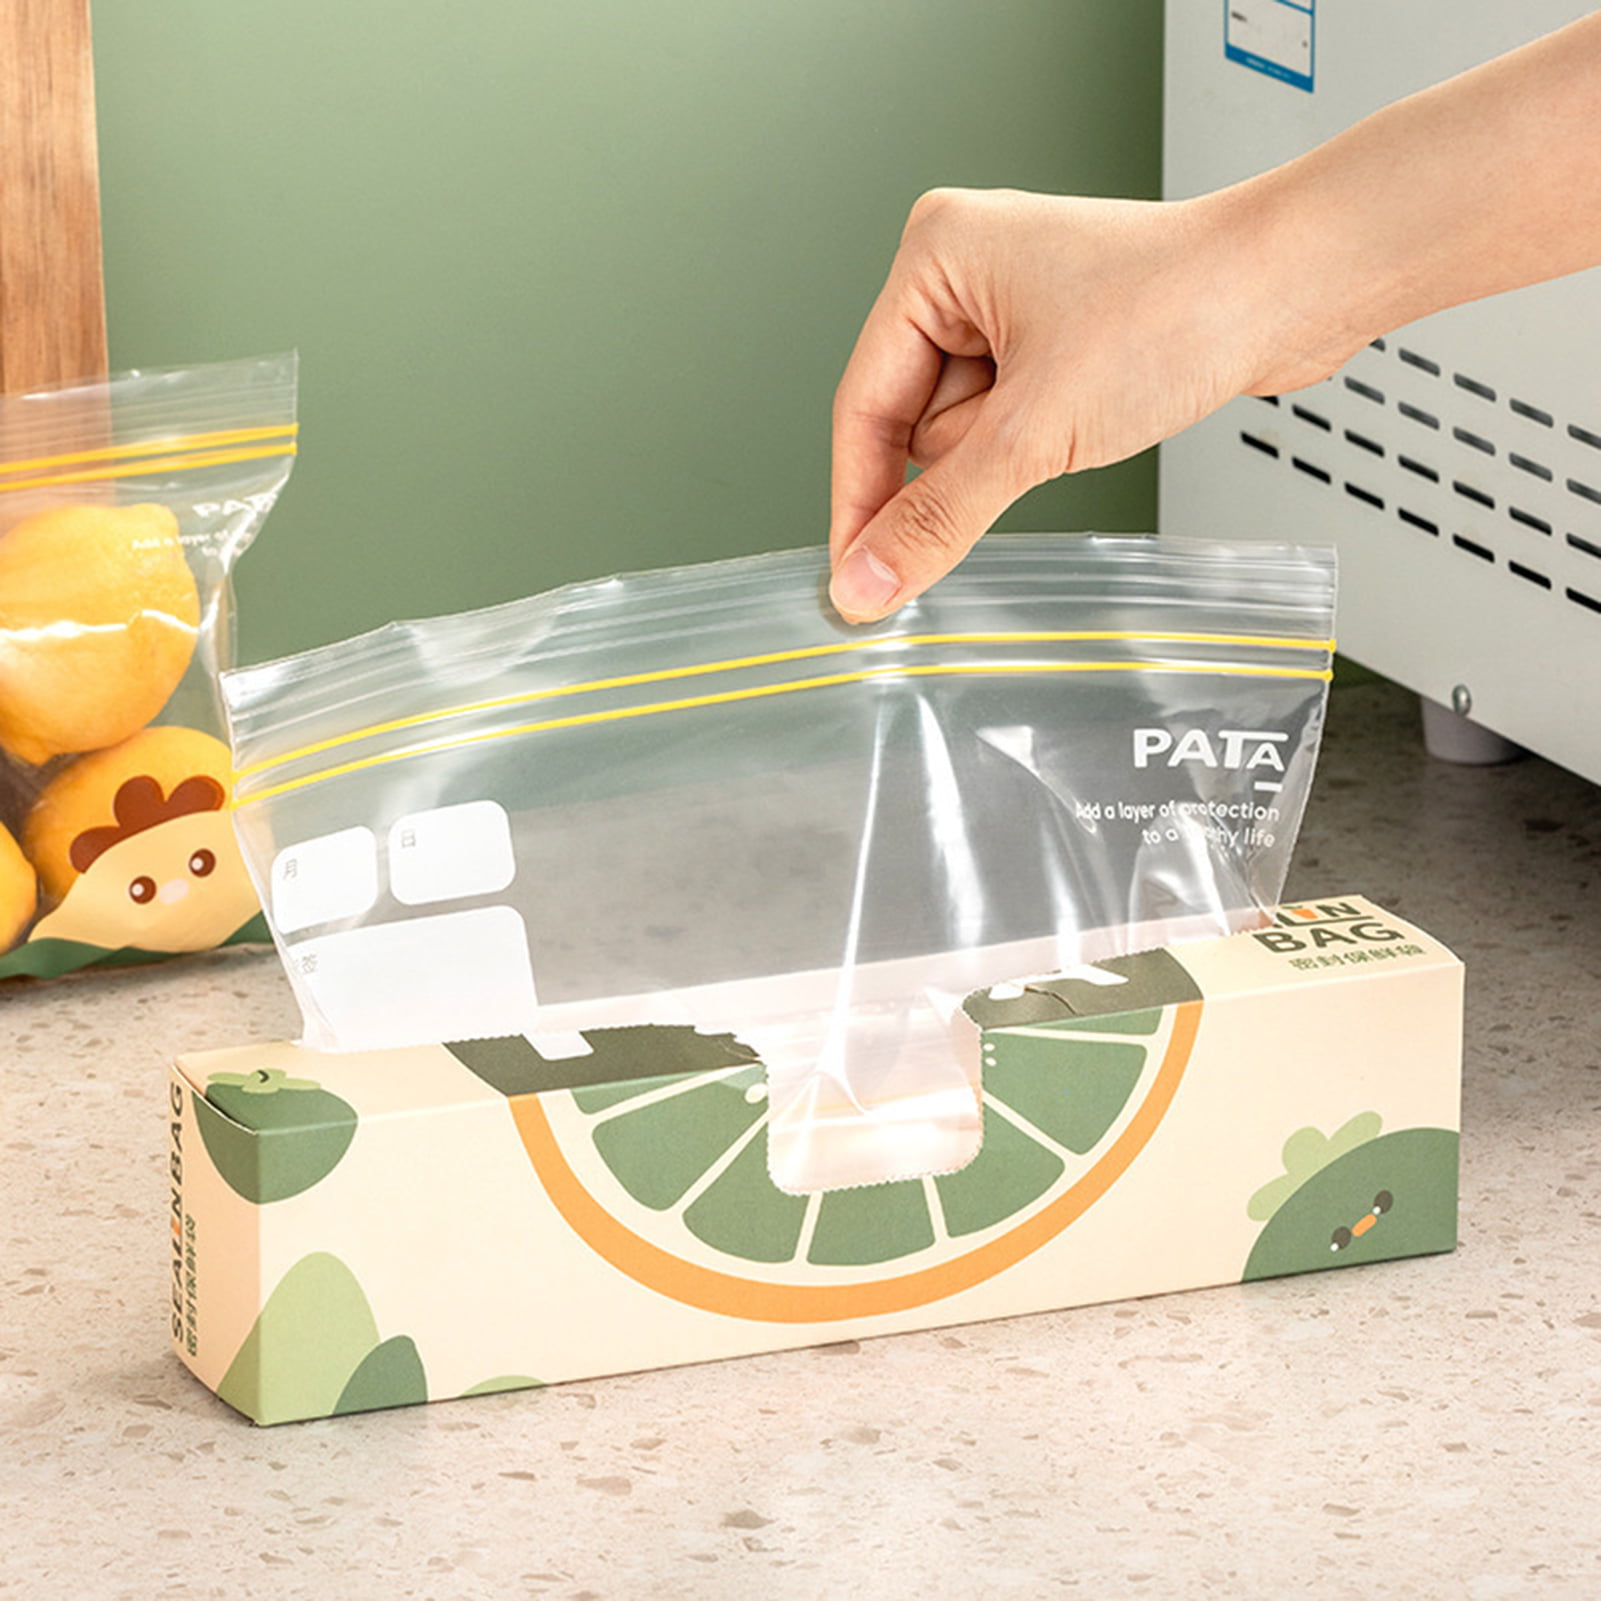 OVTENE Food Storage Bags for Cheese, Meat, and Produce - Keeps Food Fresher Longer (20 Small Bags 10.5 inchx7.25 inch)